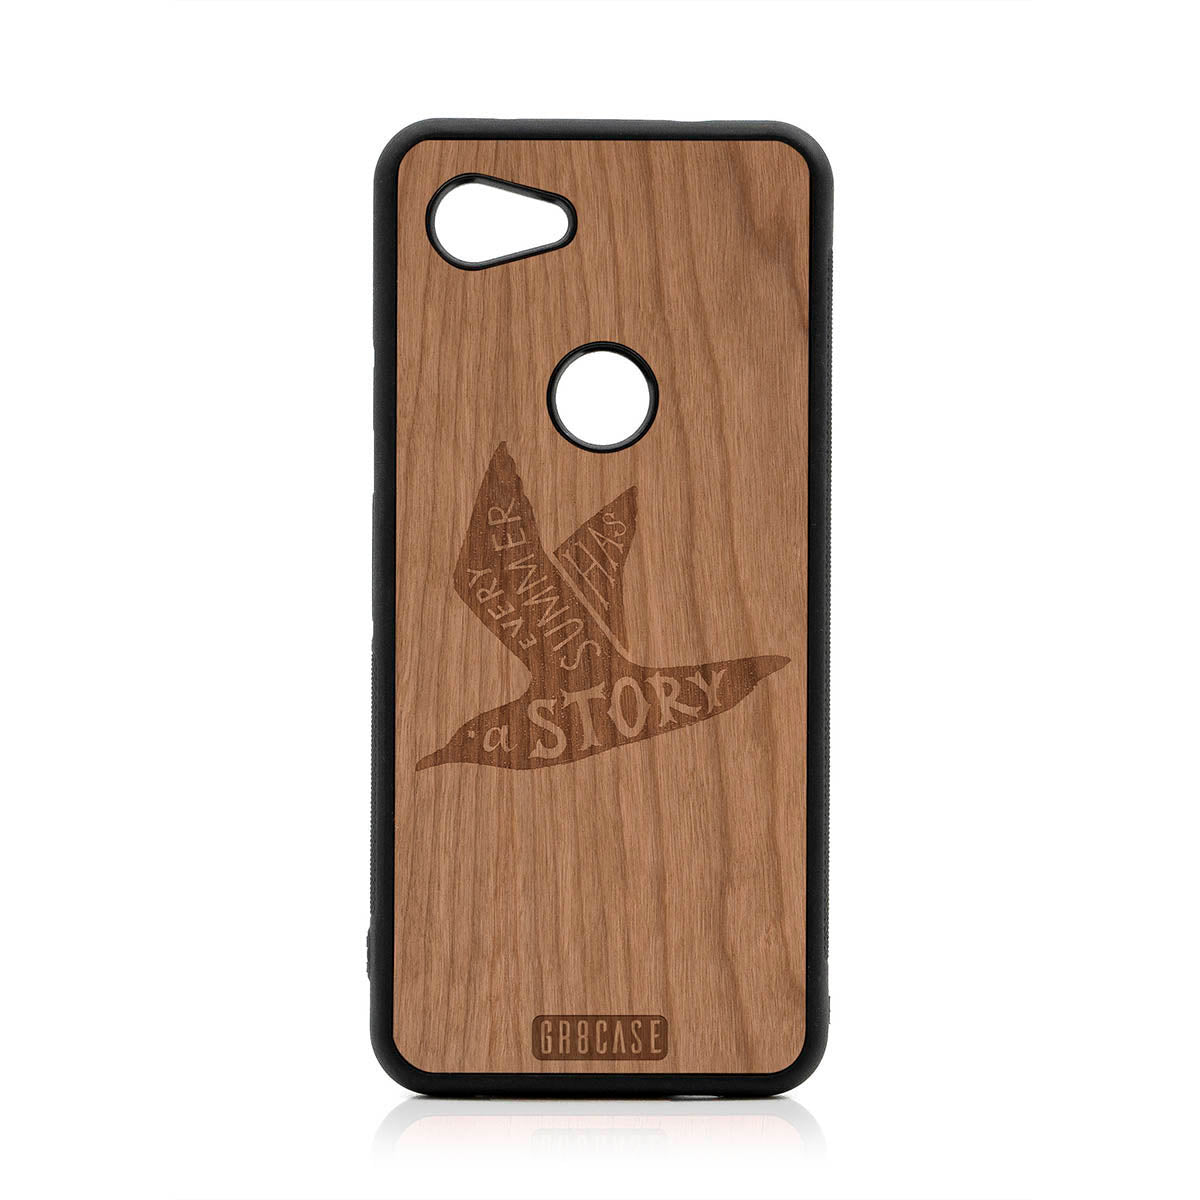 Every Summer Has A Story (Seagull) Design Wood Case For Google Pixel 3A XL